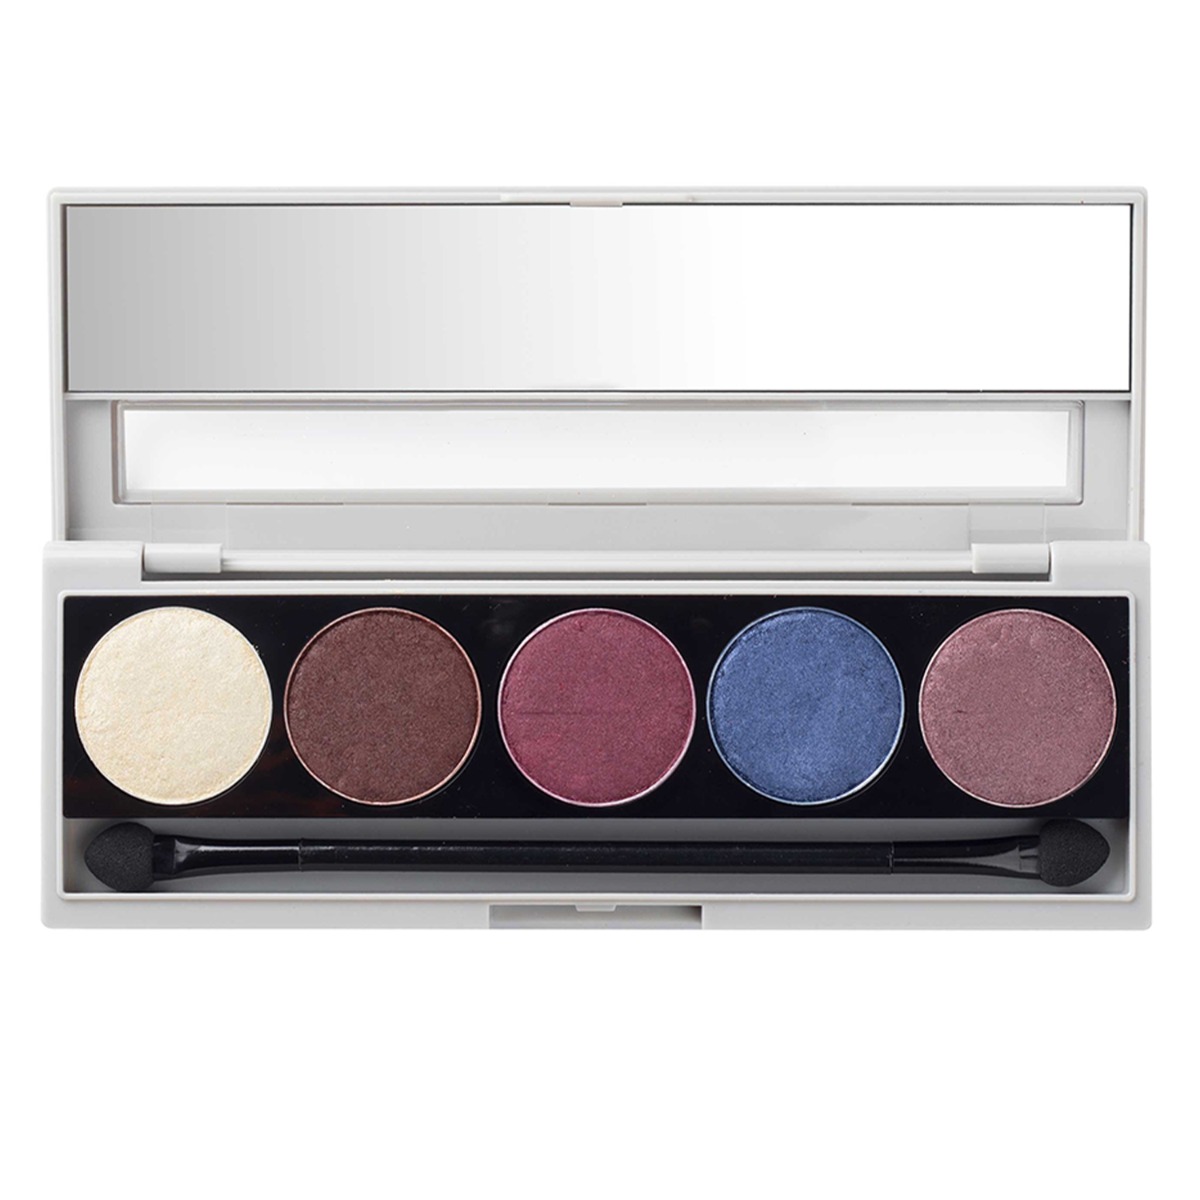 BlushBee Organic Beauty Eyeshadow Palette (5 shades), 11.5gm-Party Hue